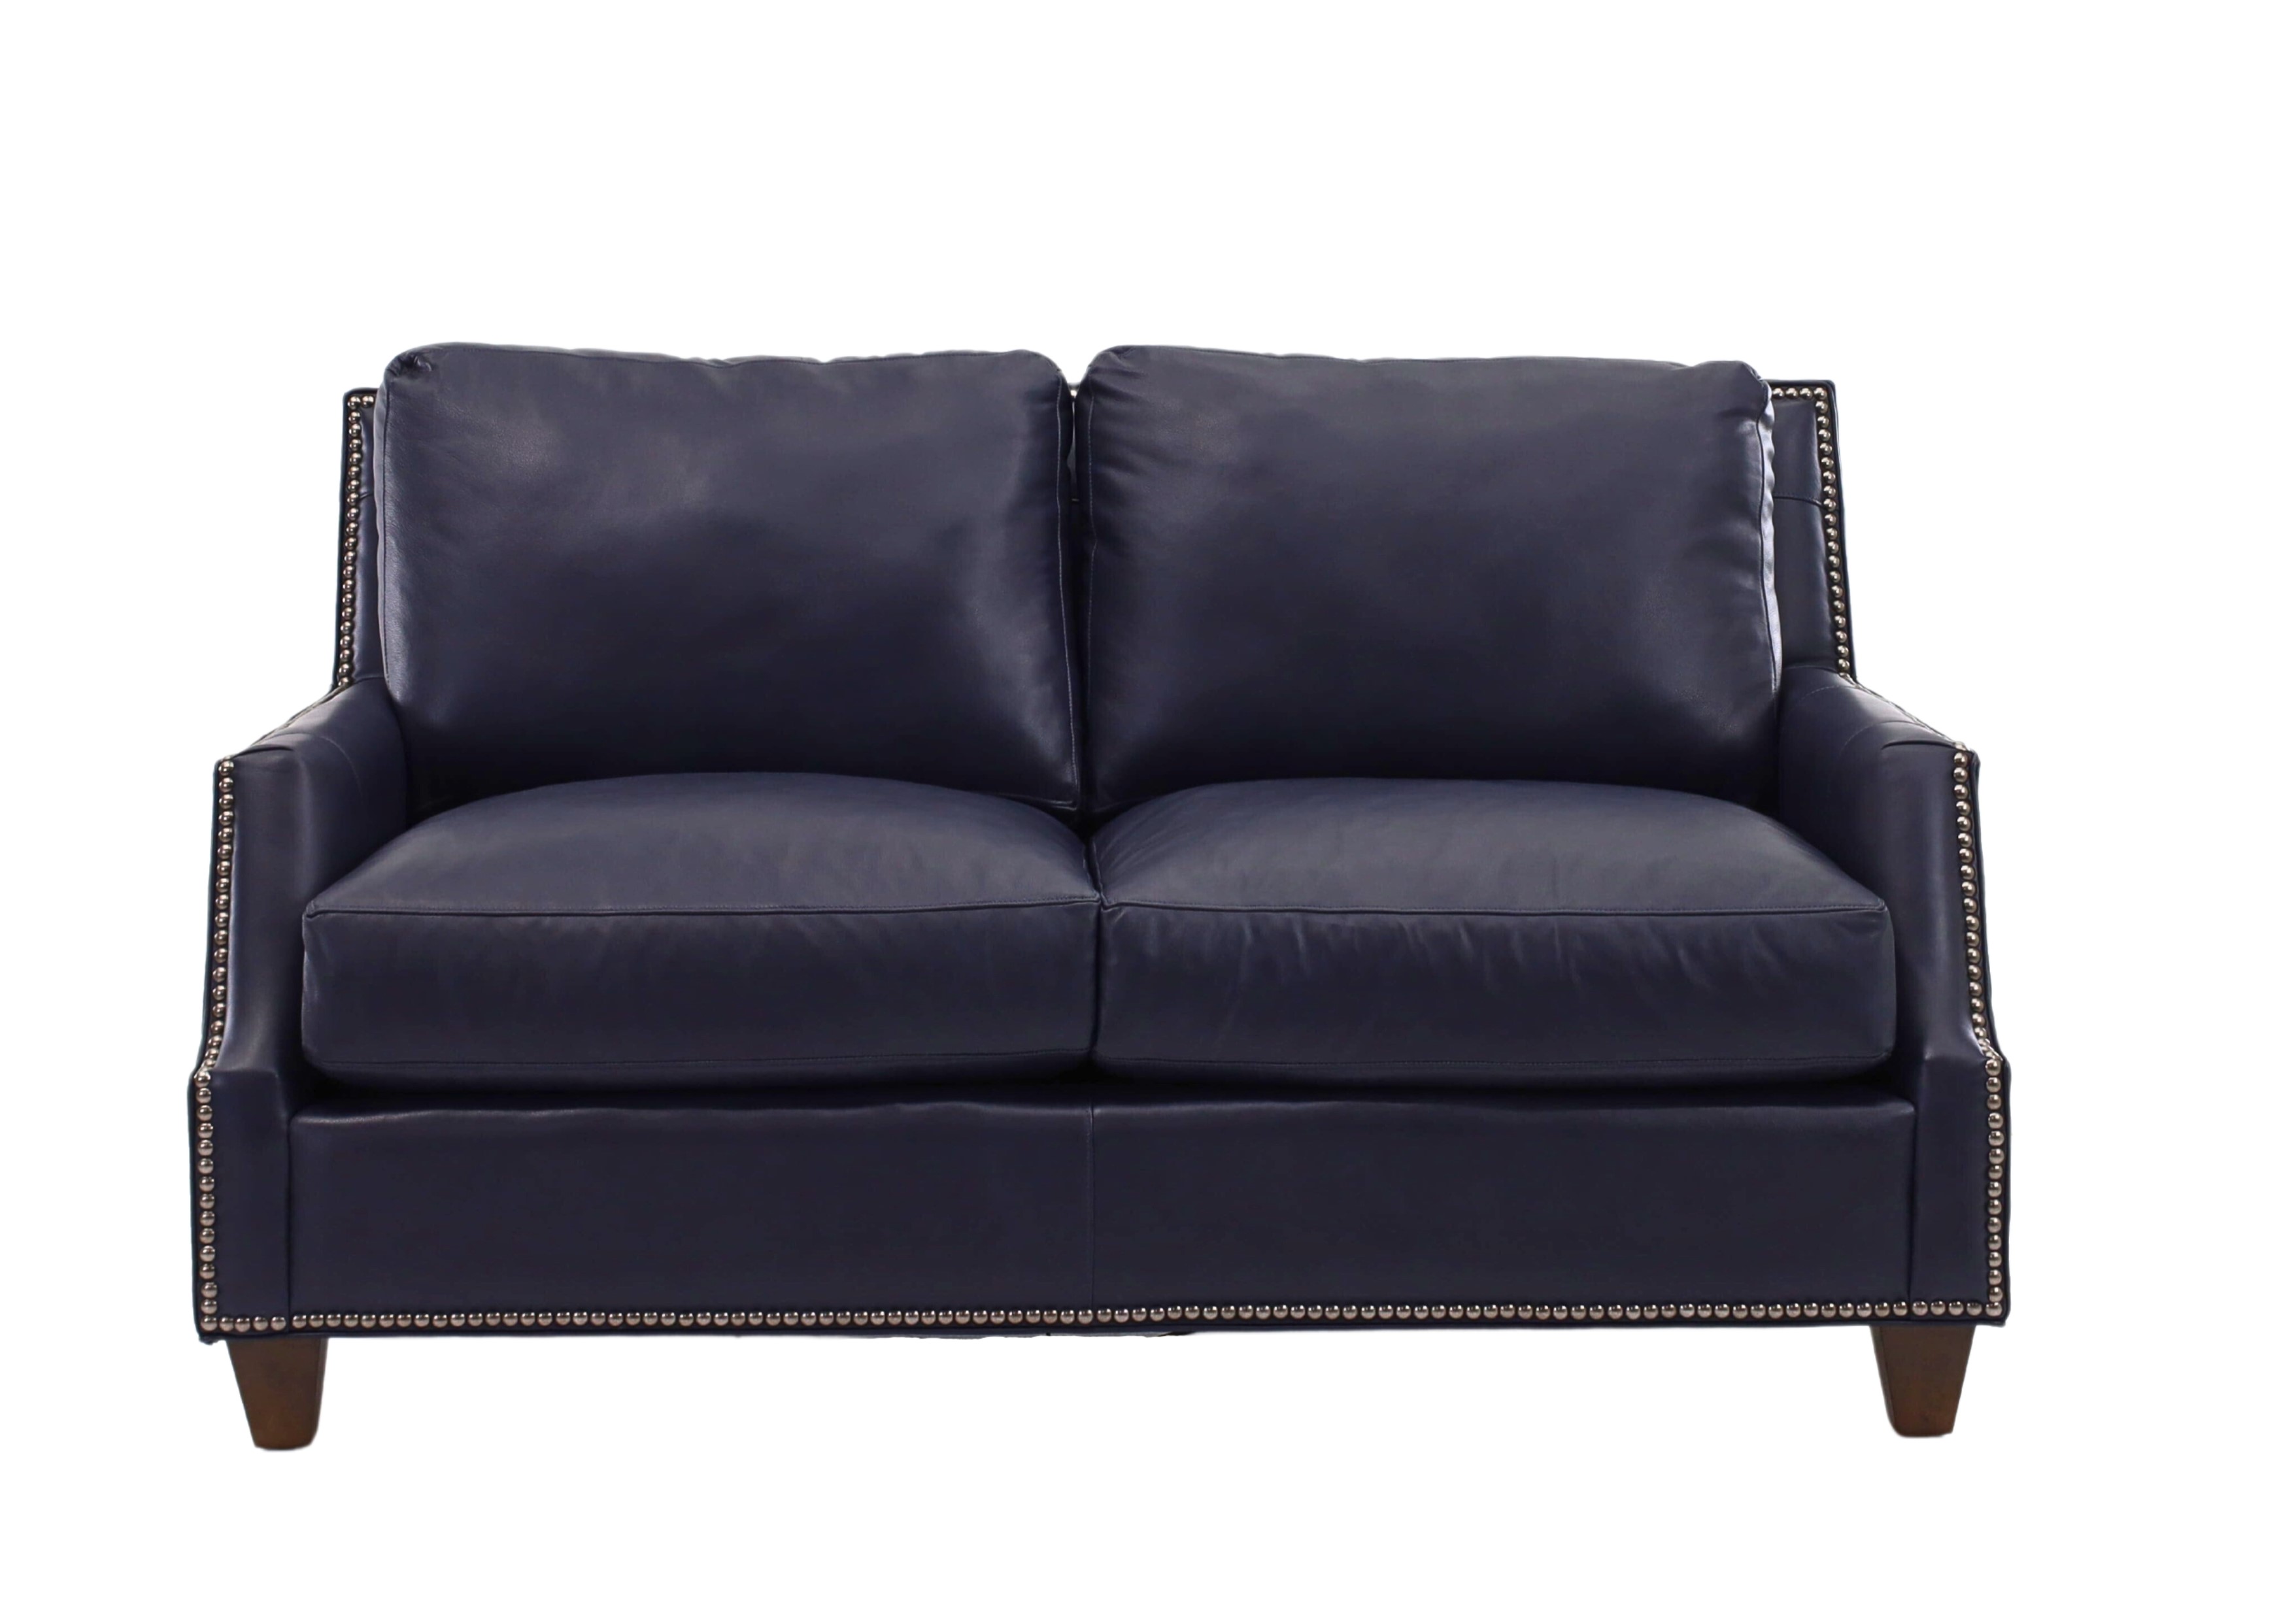 Craftmaster CM 7903 Leather Loveseat | Miskelly Furniture